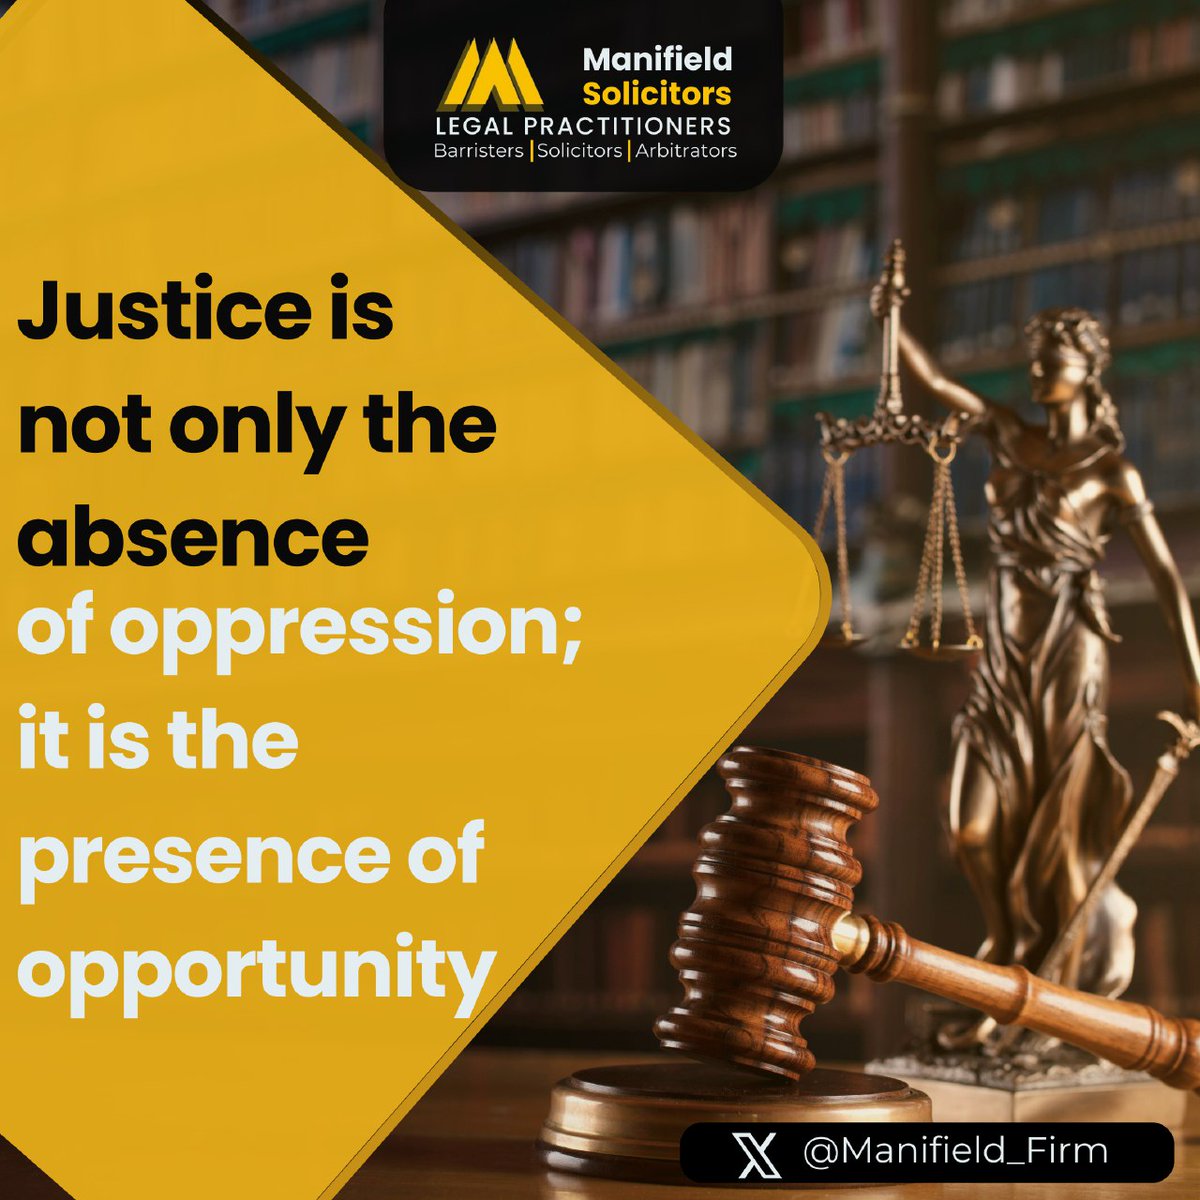 Join us in fostering justice & opportunity. At Manifield Solicitors, we believe in creating pathways for fairness and empowerment. Let's work together to make a difference

#JusticeForAll #OpportunityMatters #ManifieldSolicitors #LegalAid #FairnessInLaw #Empowerment #LegalJustice